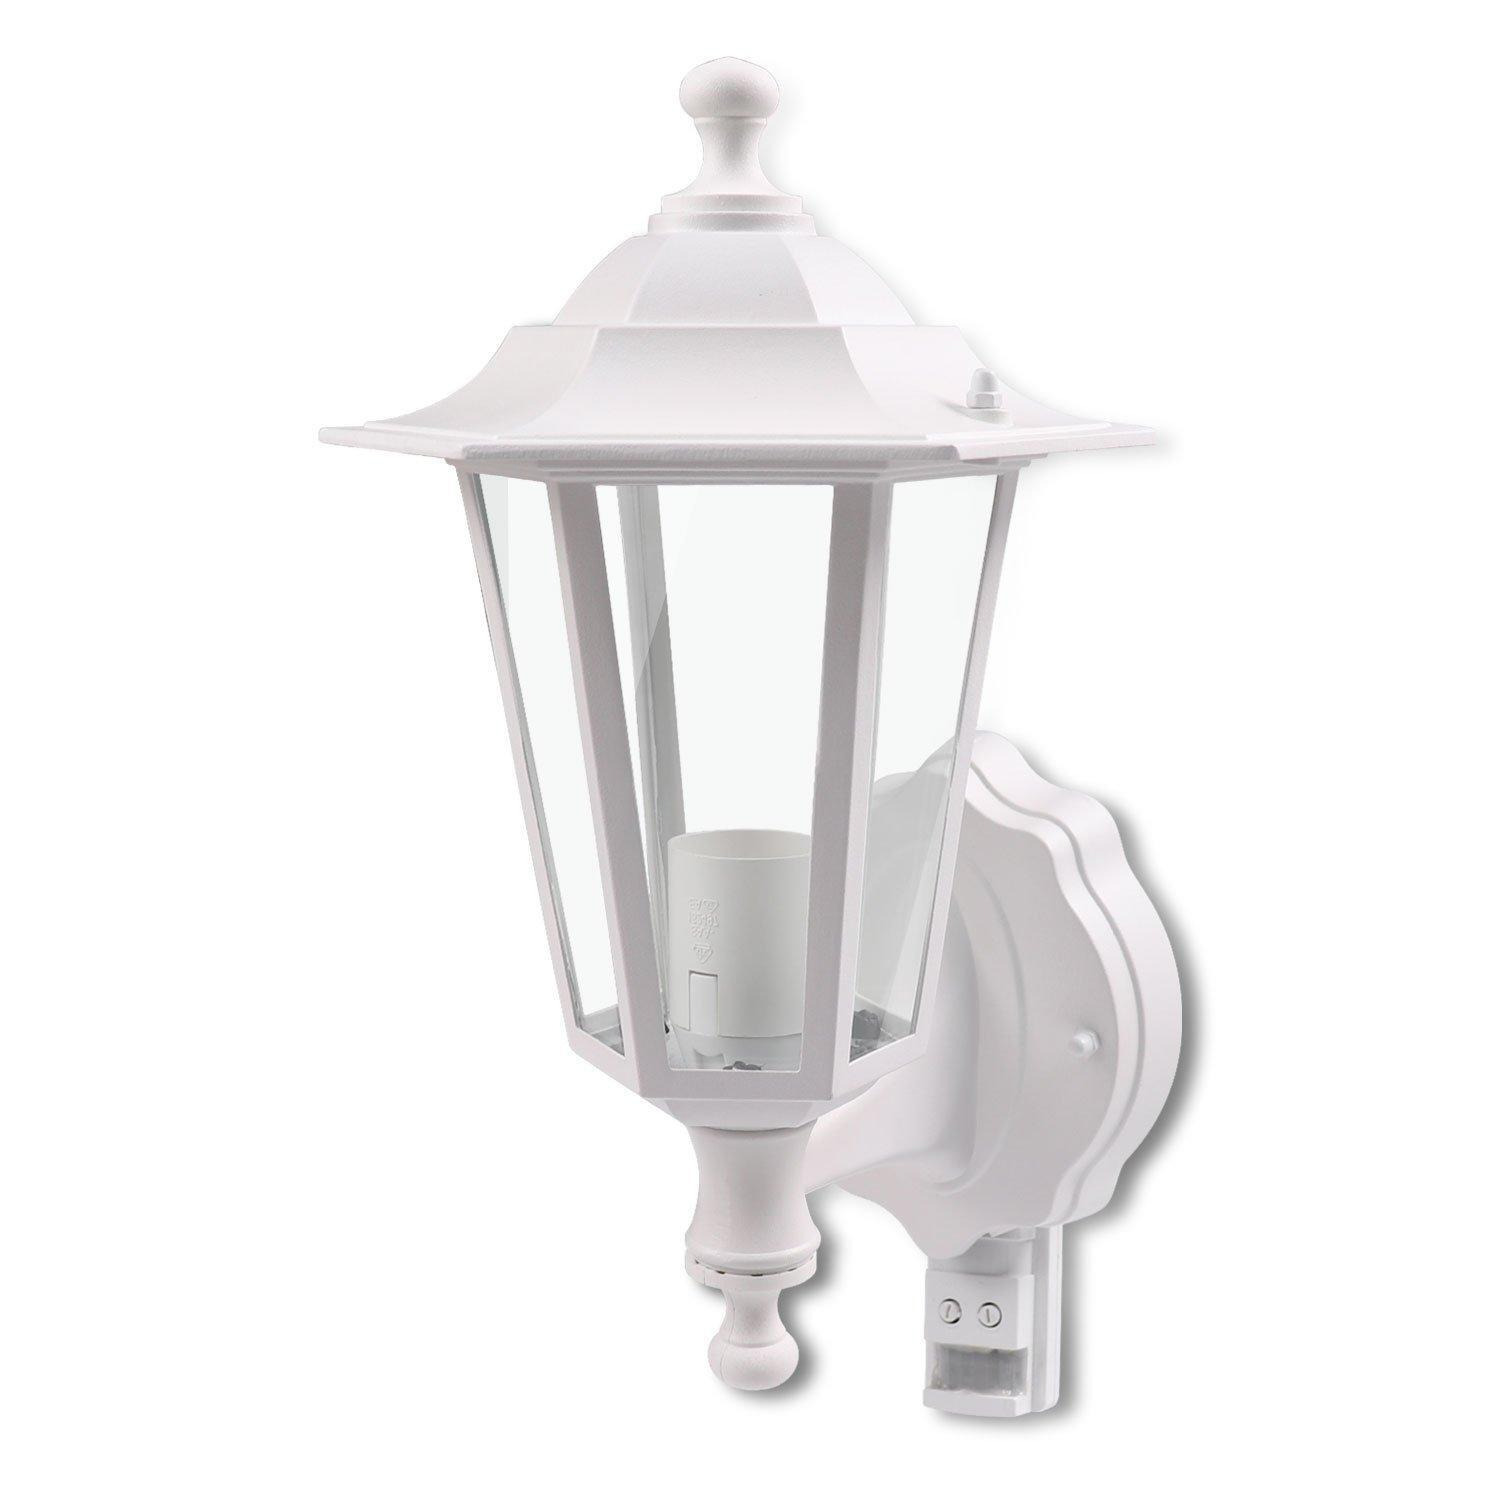 Outdoor Vintage Wall Light with E27 Lamp Holder with Motion Sensor (Bulb not included) - image 1